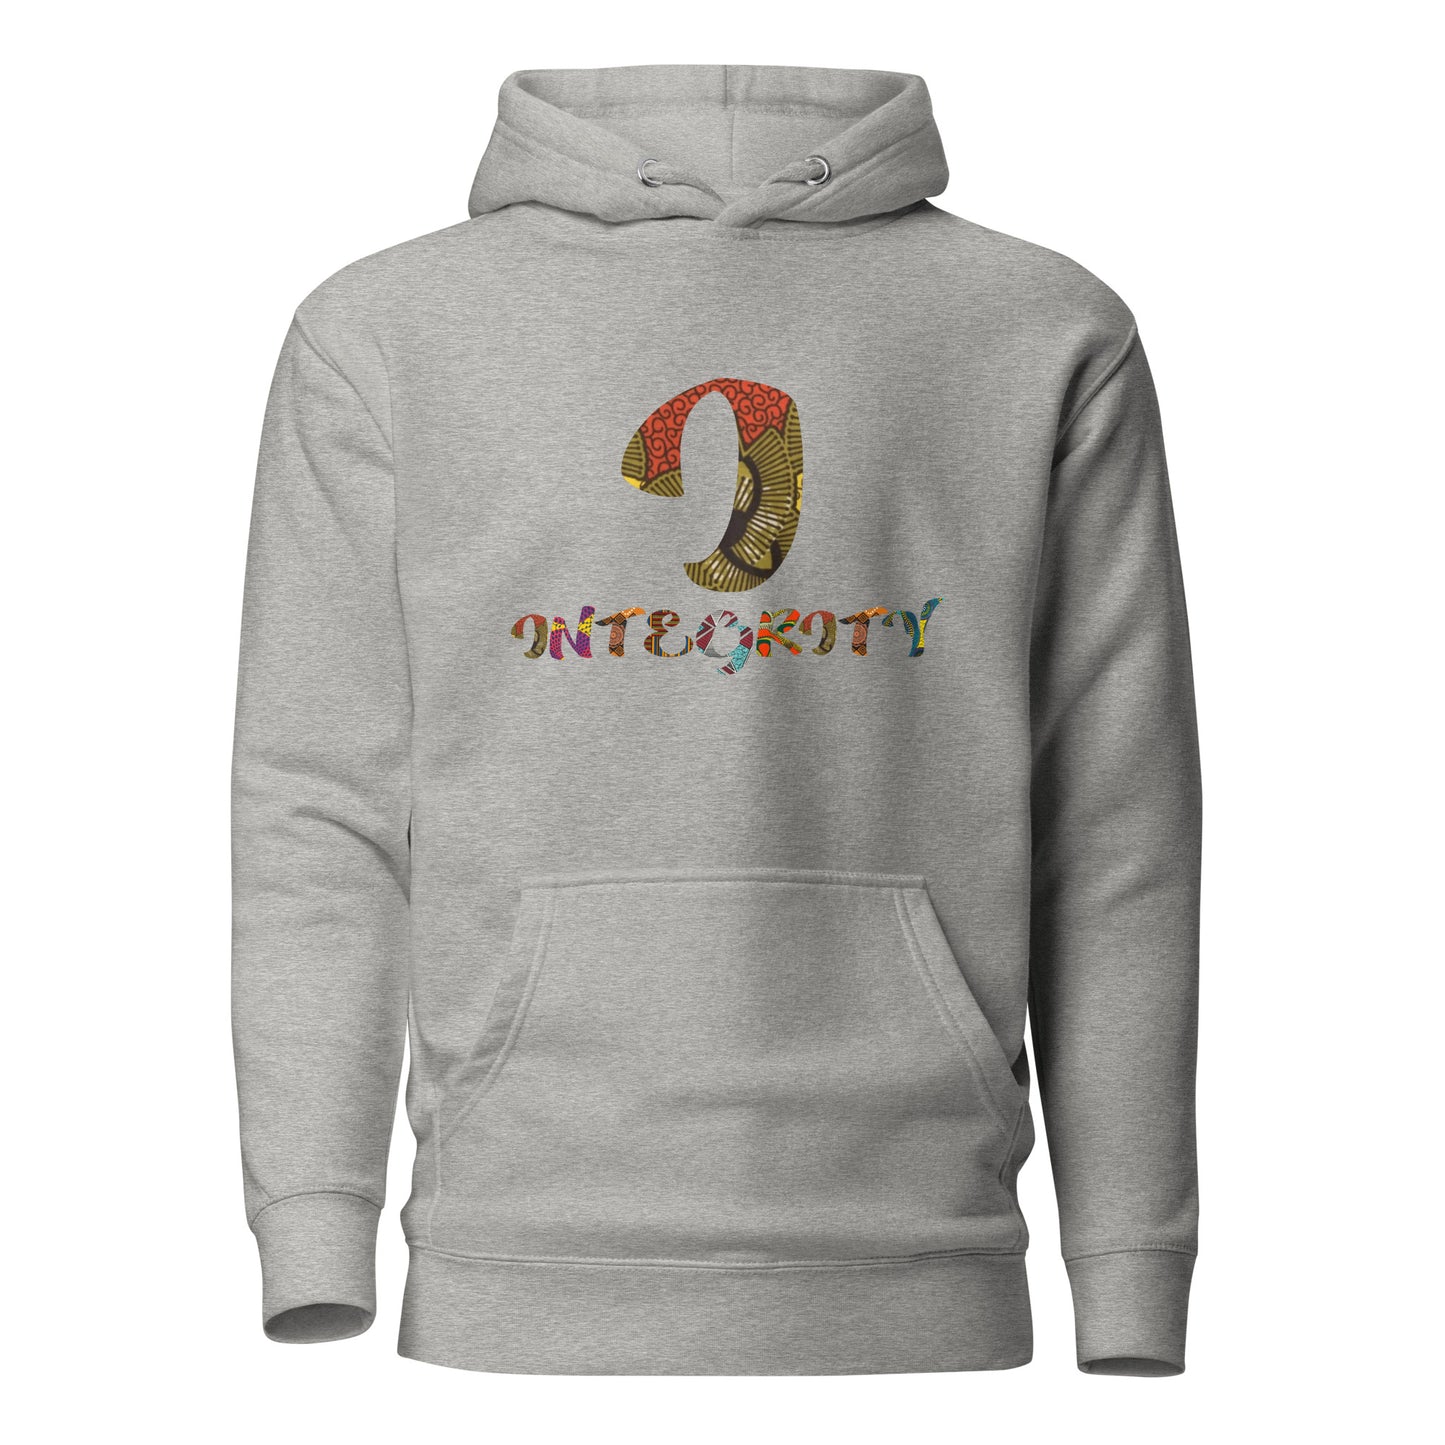 I For Integrity Unisex Afro Graphic Hoodie